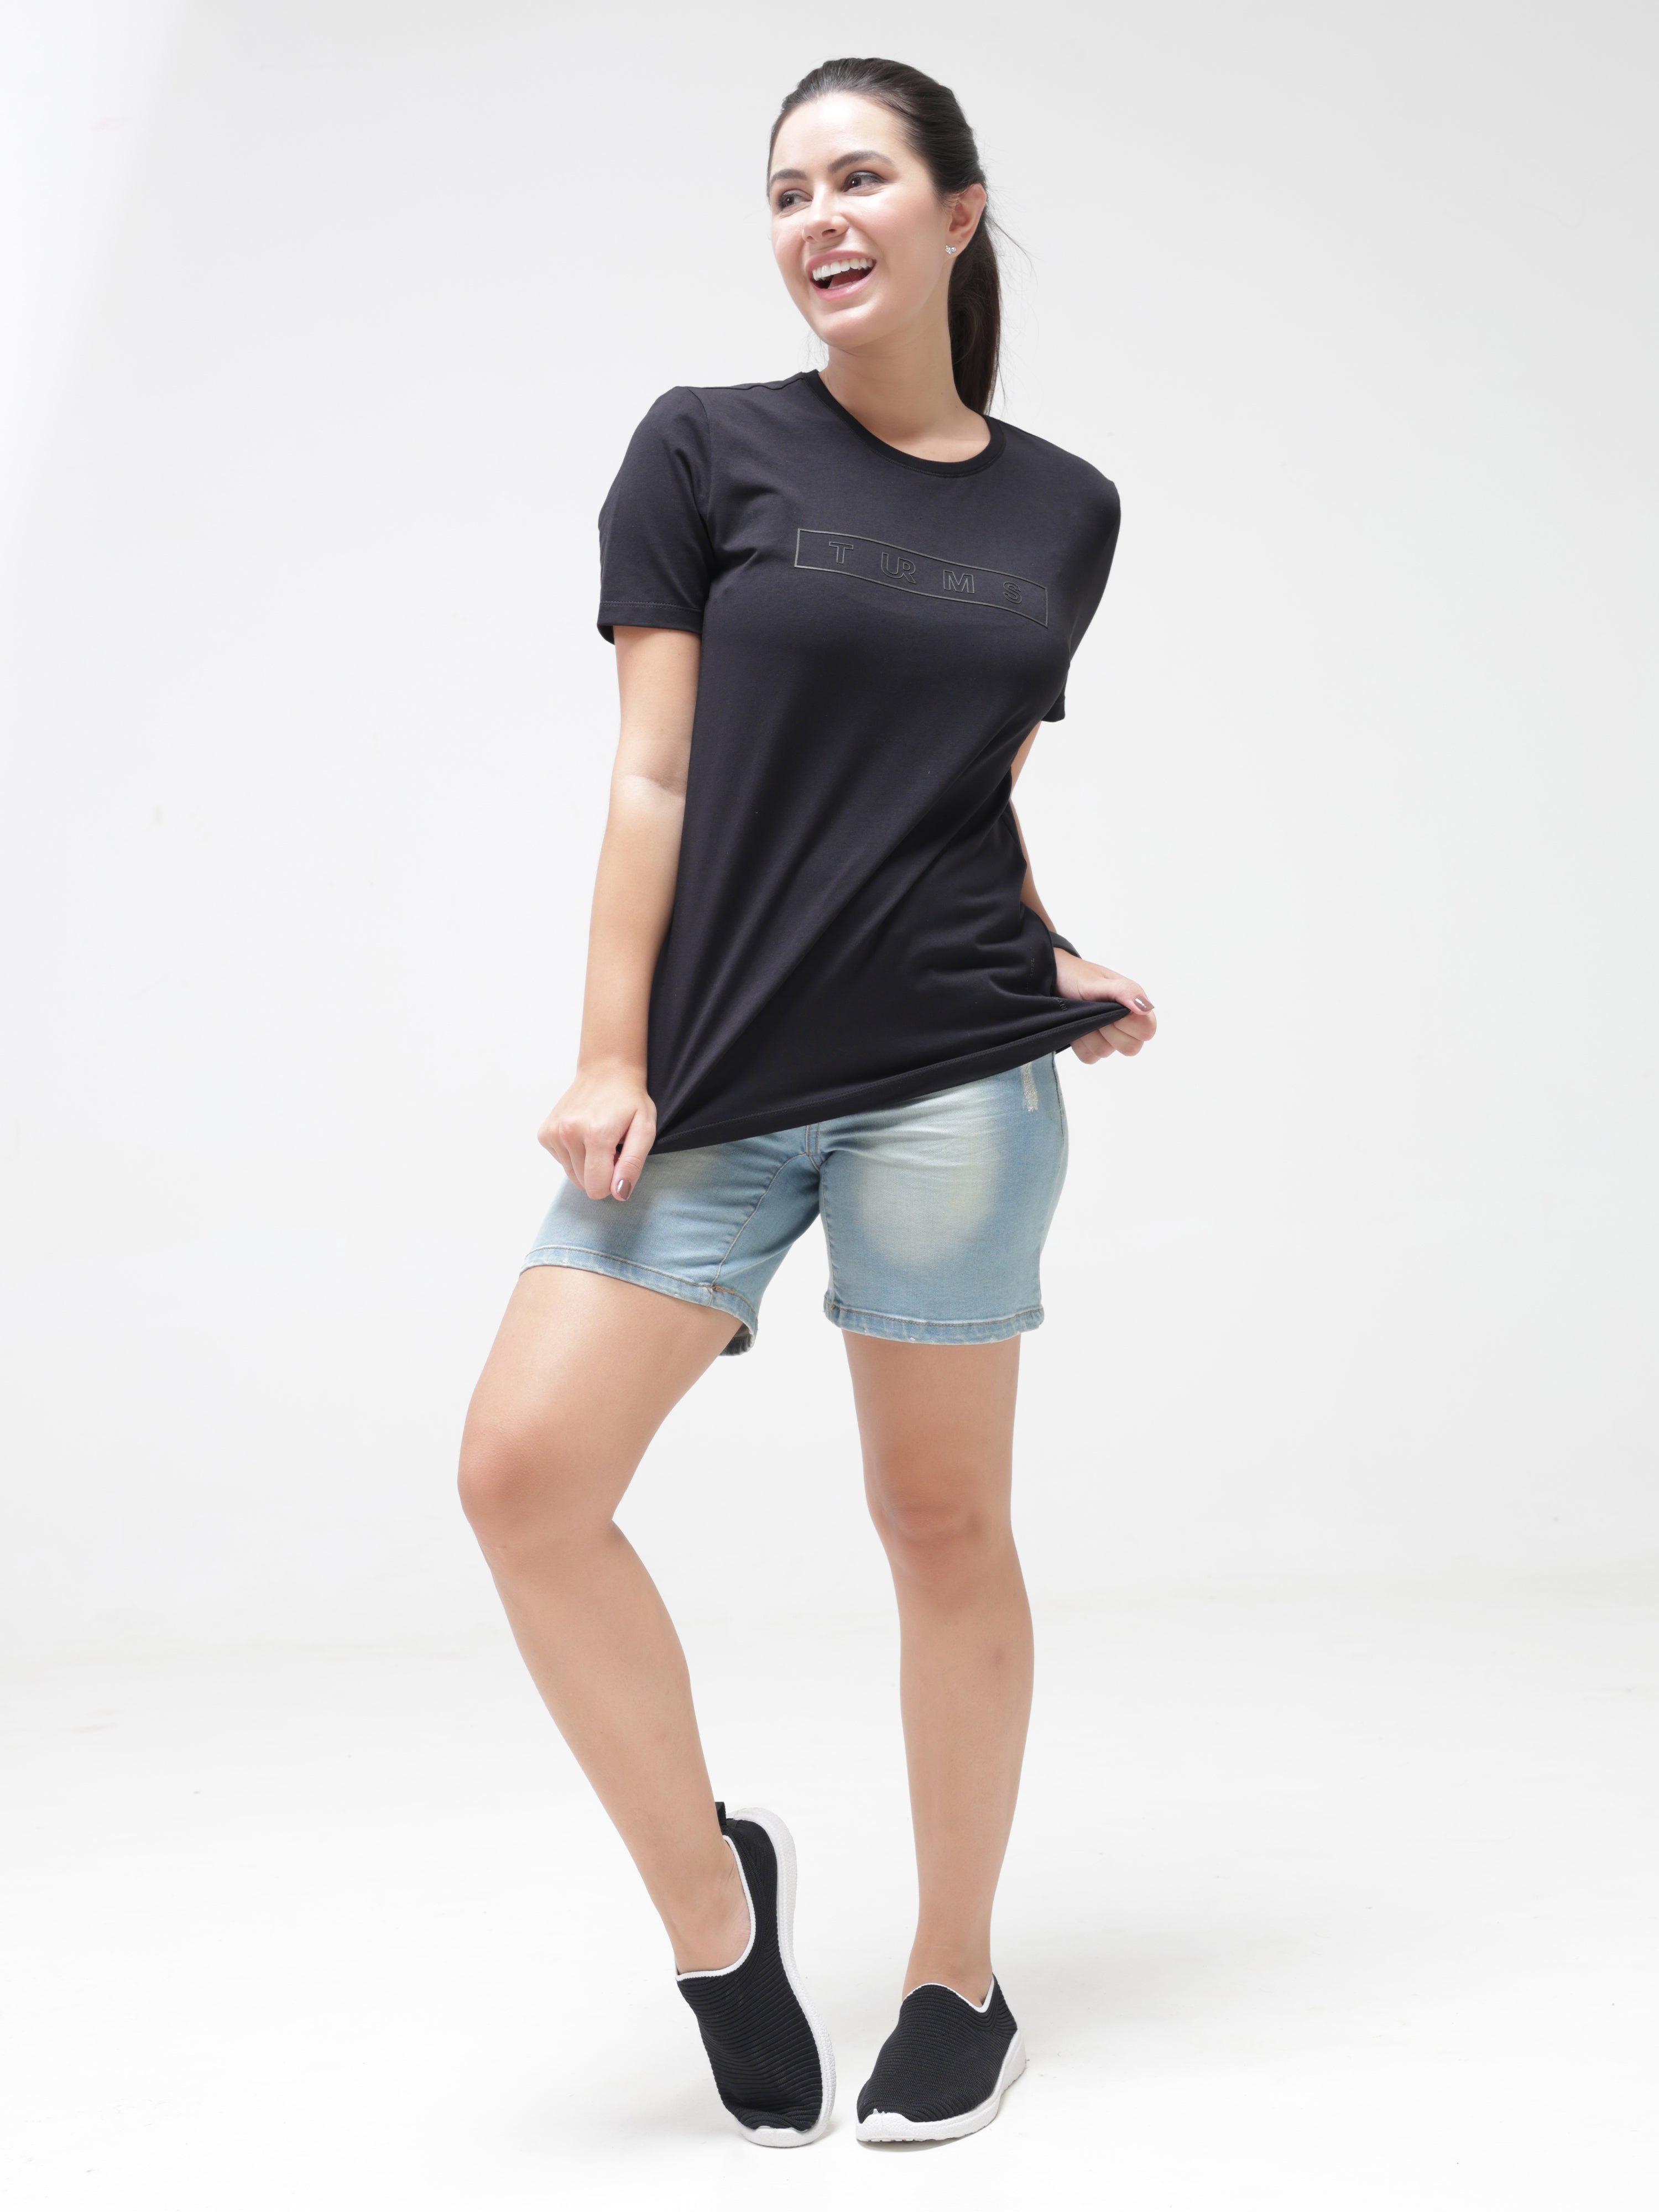 Woman wearing Midnight Elegance T-shirt by Turms, black round-neck, anti-stain, anti-odor, tailored fit, stretchable, premium cotton blend